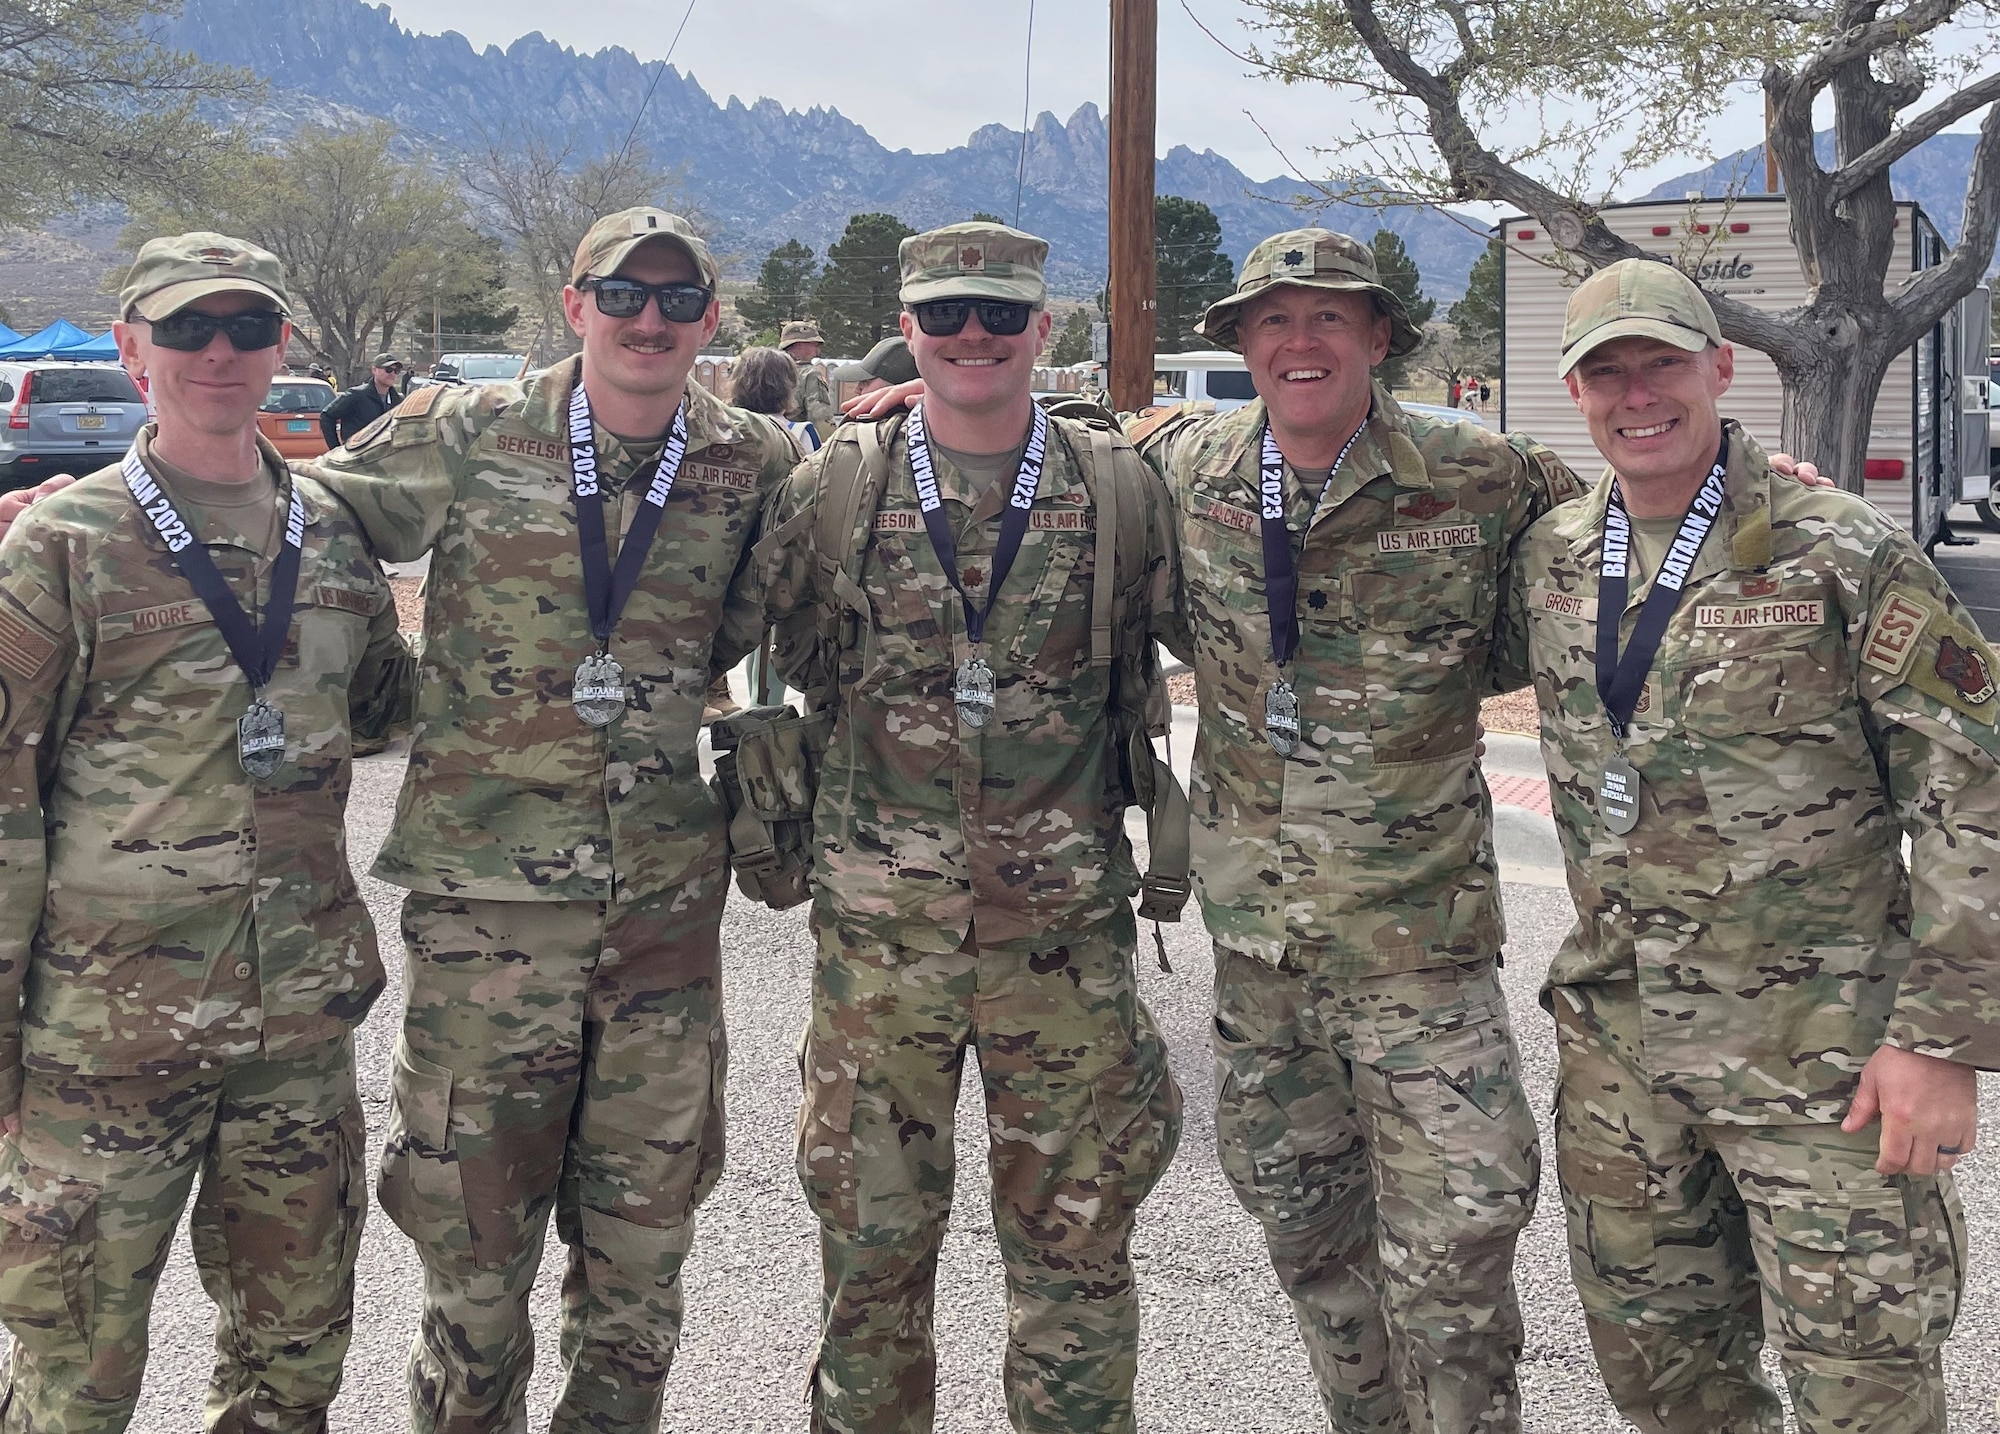 Air Force Operational Test and Evaluation Center team members participated in the 34th Annual Bataan Memorial Death March held at White Sands Missile Range, N.M. The more than 26-mile march is held annually to commemorate service members who defended the Philippine Islands during World War II. Some of the AFOTEC team members included (left to right) Maj. Christopher Moore, 1st Lt. Alec Sekelsky, Maj. Joel Greeson, Lt. Col. Eric Fancher, and AFOTEC Command CMSgt. Christopher Griste.